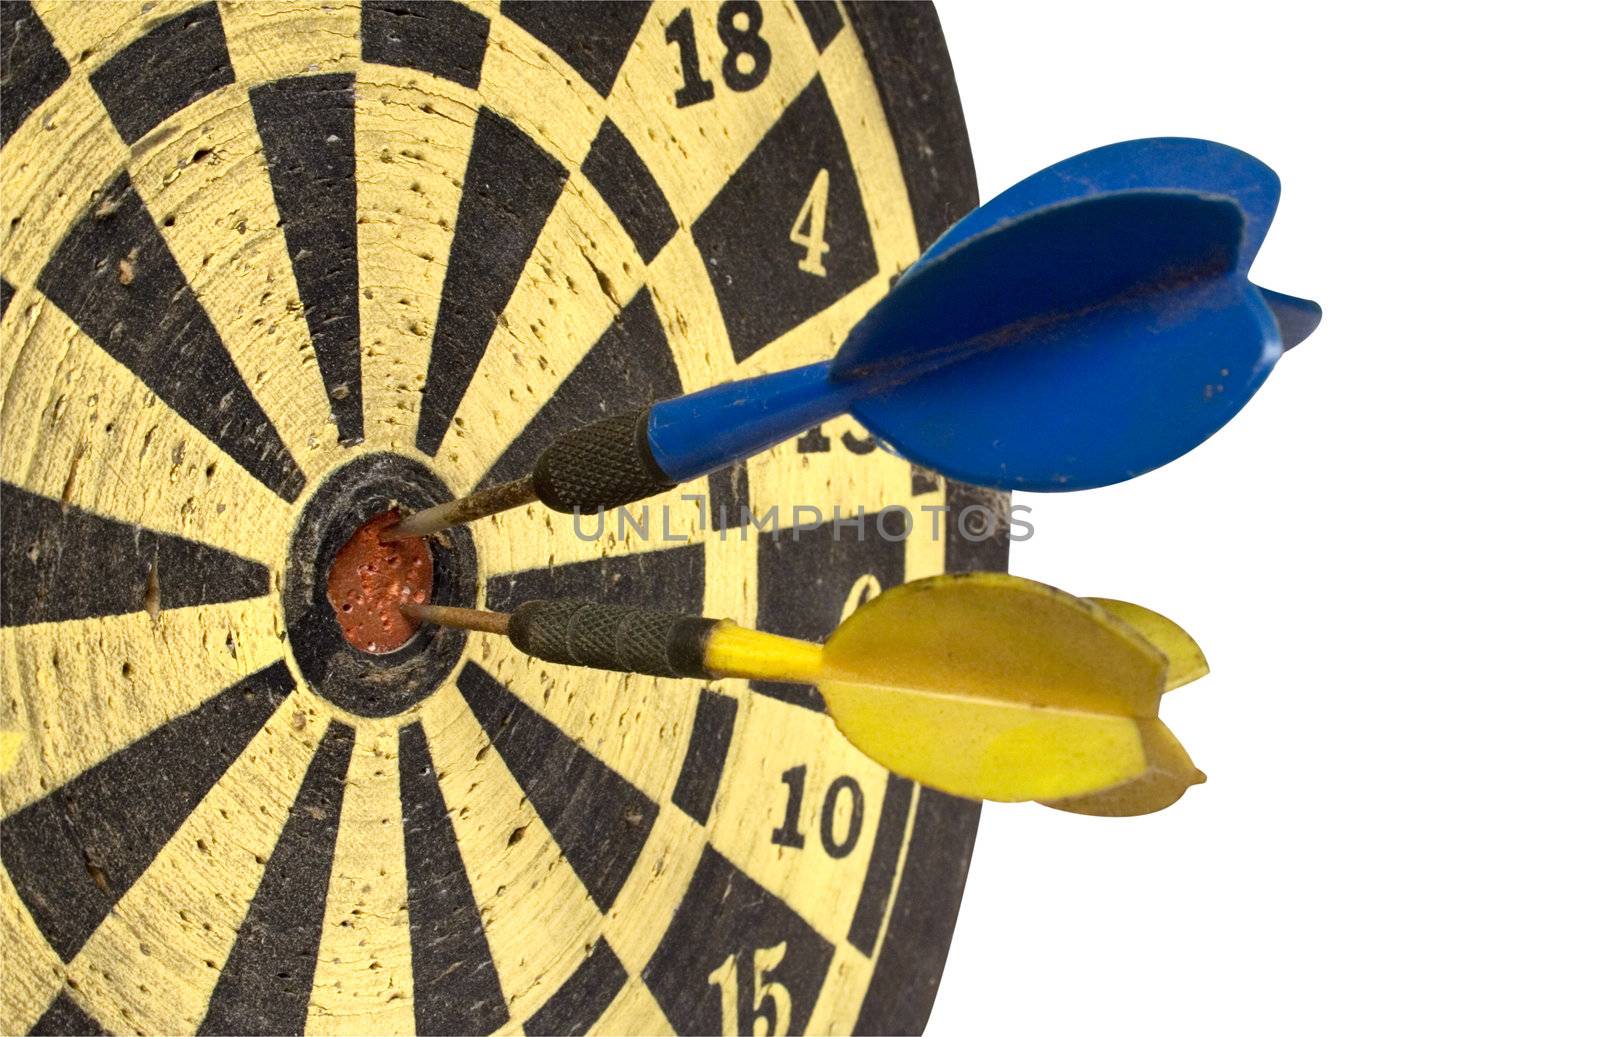 Dartboard isolated on a white background. File contains clipping path.